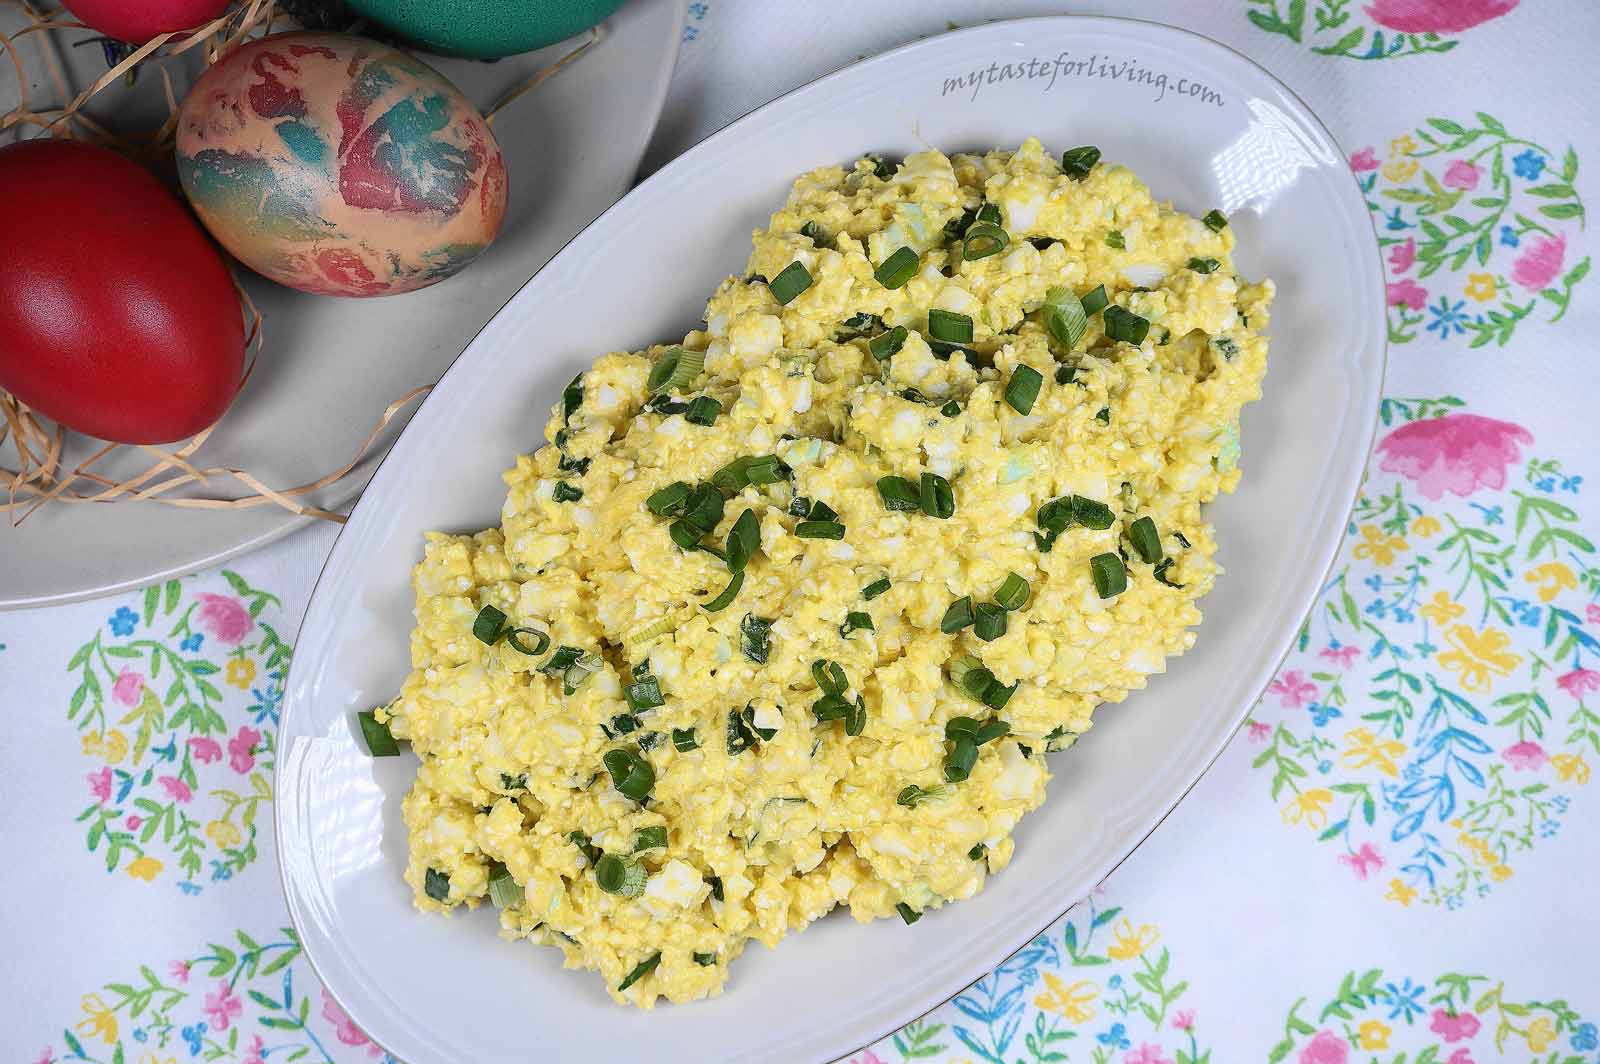 Egg salad or mashed eggs with feta cheese and onion - it can also be called an appetizer, but in the end, it is a good idea how to use the rest of our boiled Easter eggs.